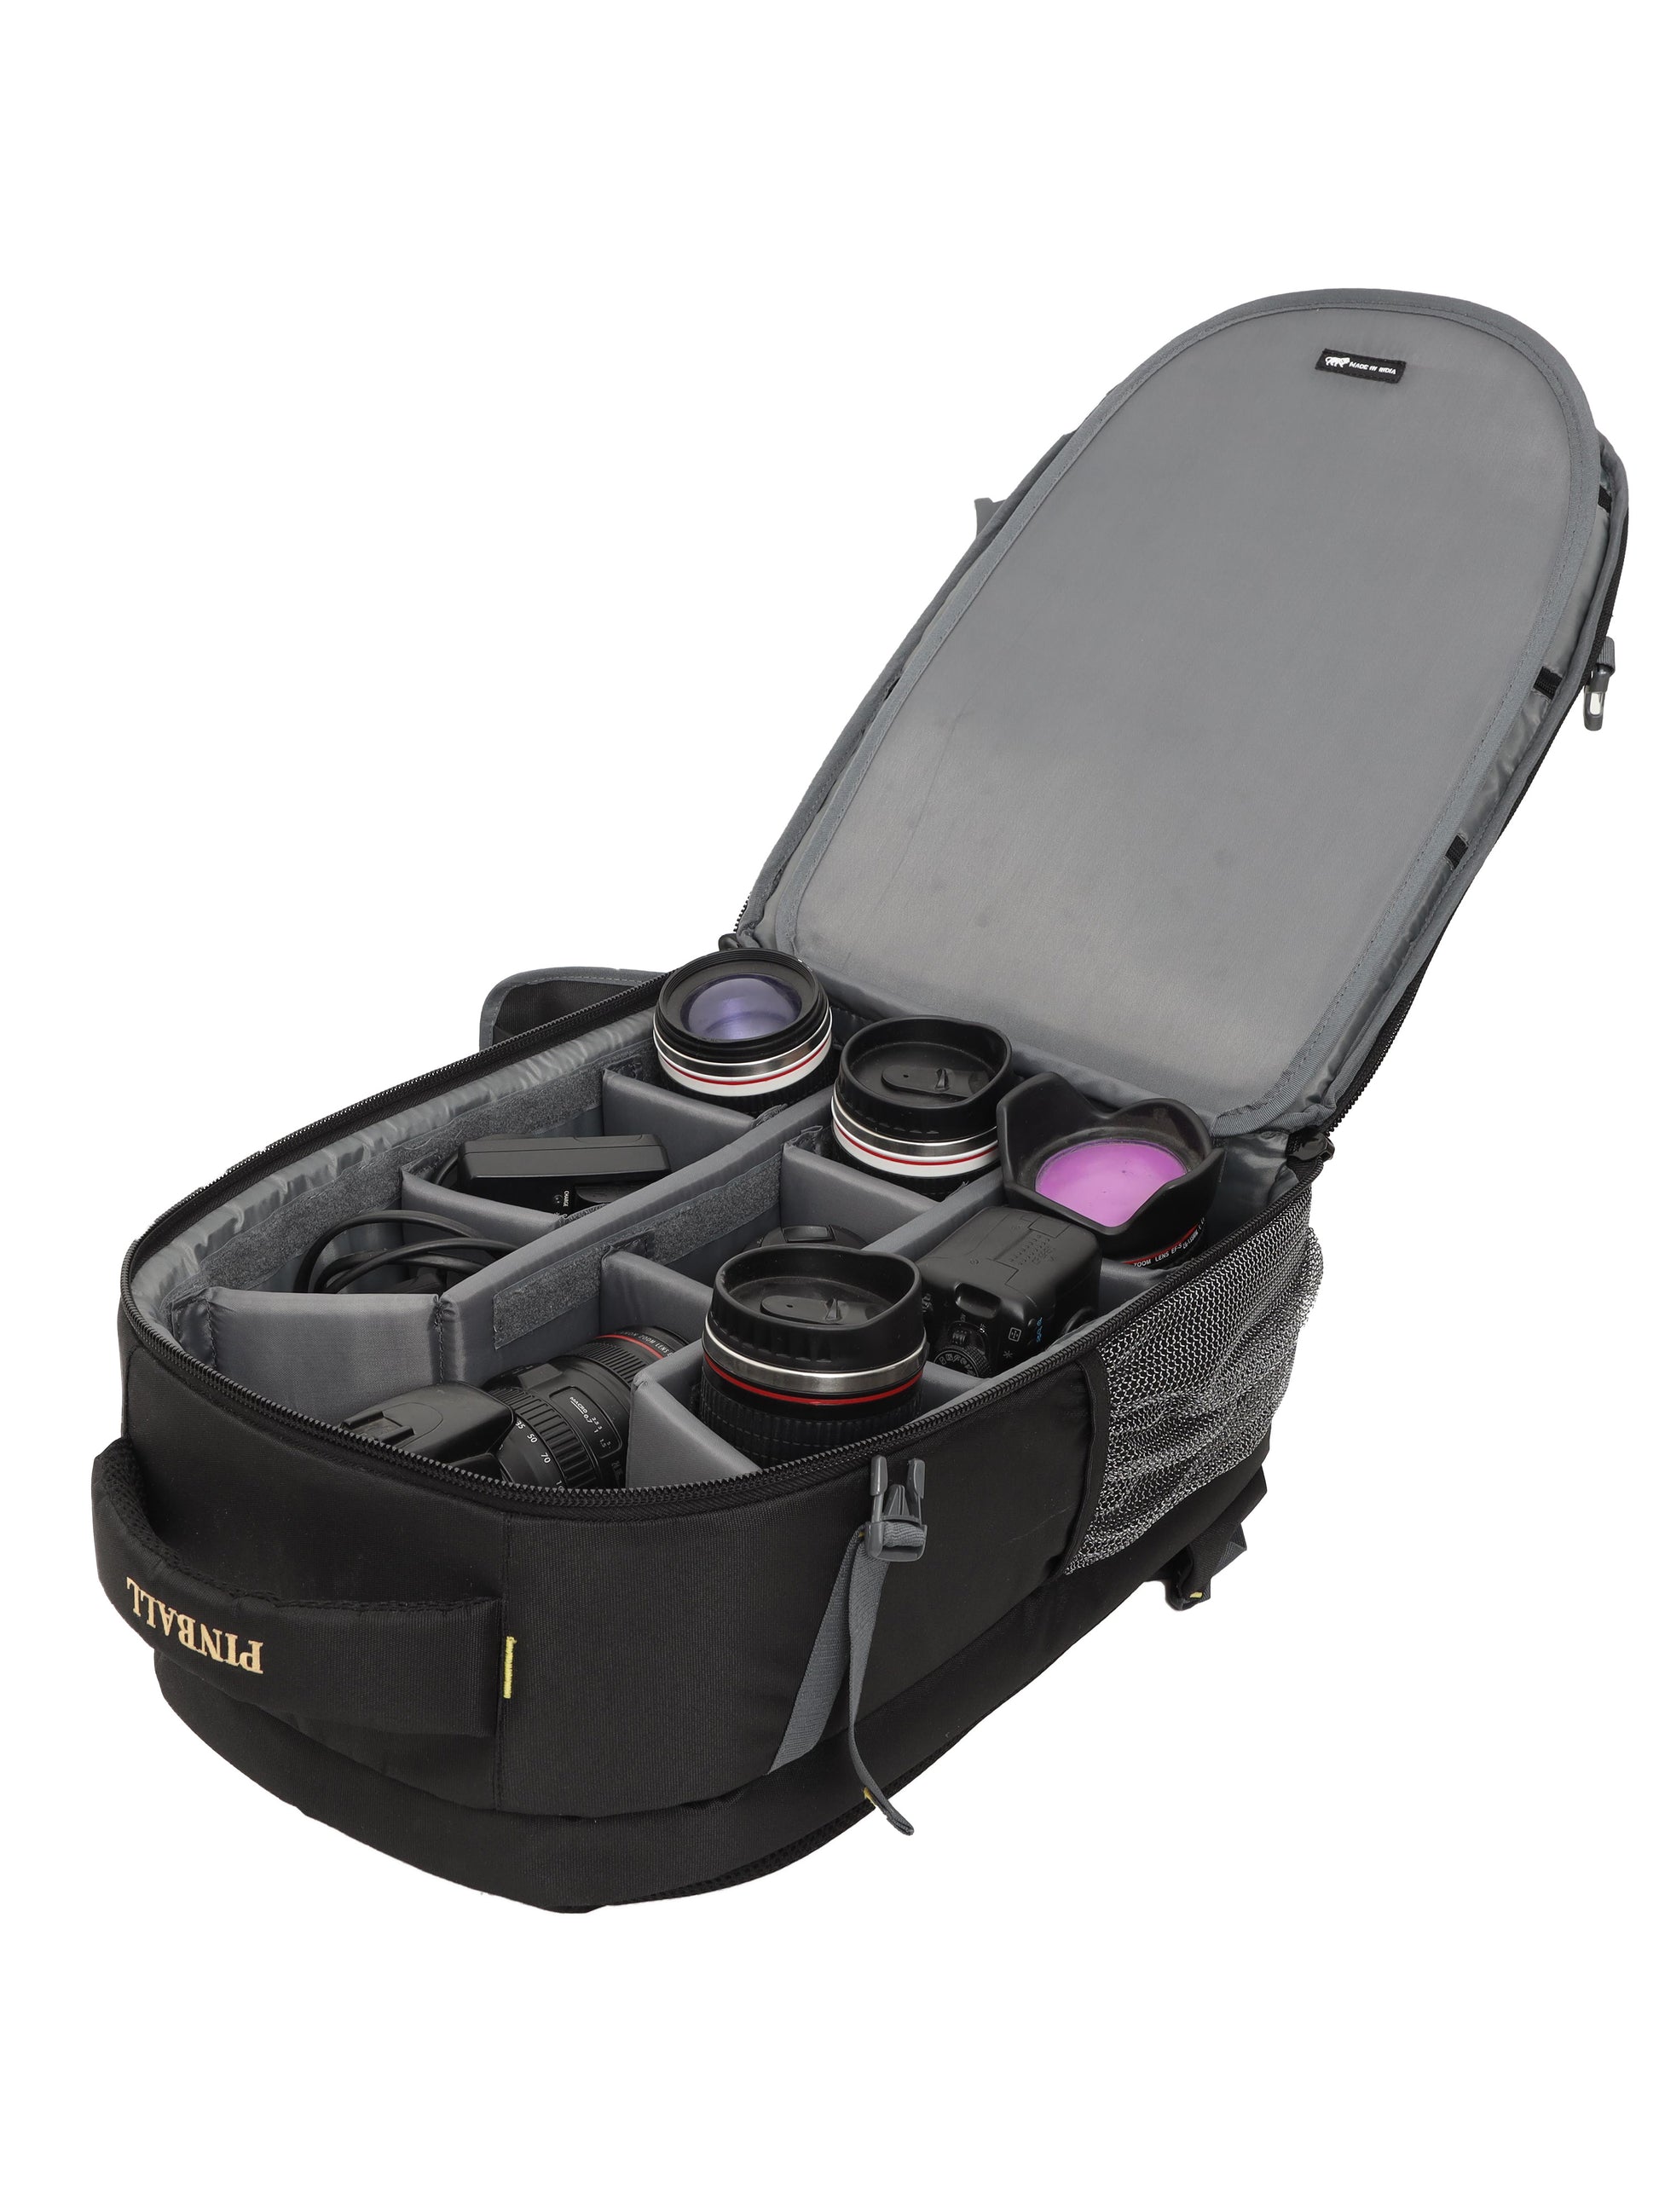 Open view of the G12 Target DSLR camera bag, revealing a carefully arranged collection of cameras, lenses, tripods, flashes, and other essential photography equipment. The bag's spacious compartments and versatile organization ensure convenient storage and easy access to gear during photo shoots."